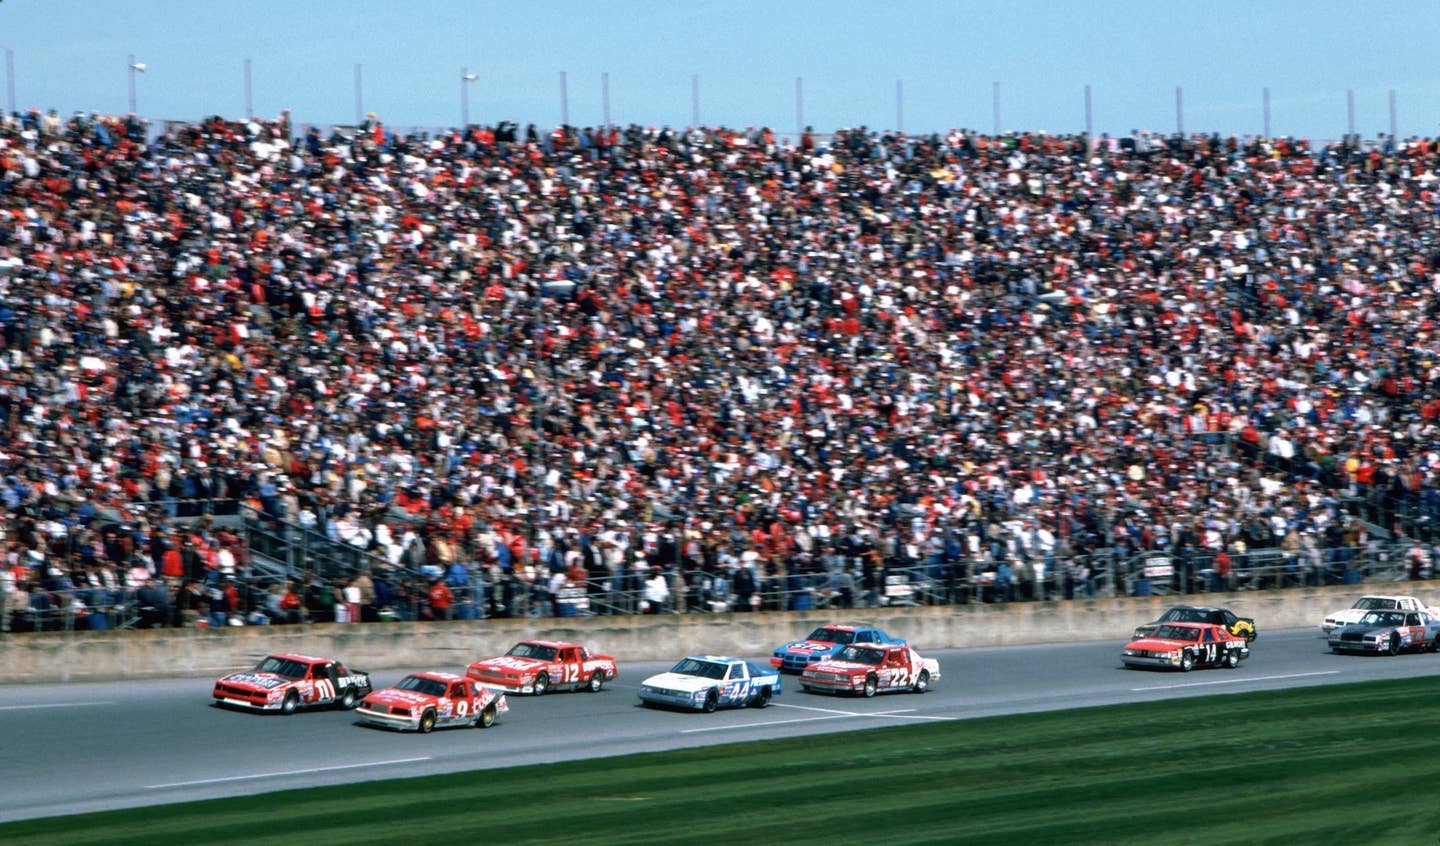 NASCAR fans pack the grandstands as a group of cars pass at the Daytona International Speedway during the 1986 Daytona 500 on February 16, 1986 in Daytona Beach, Florida. 